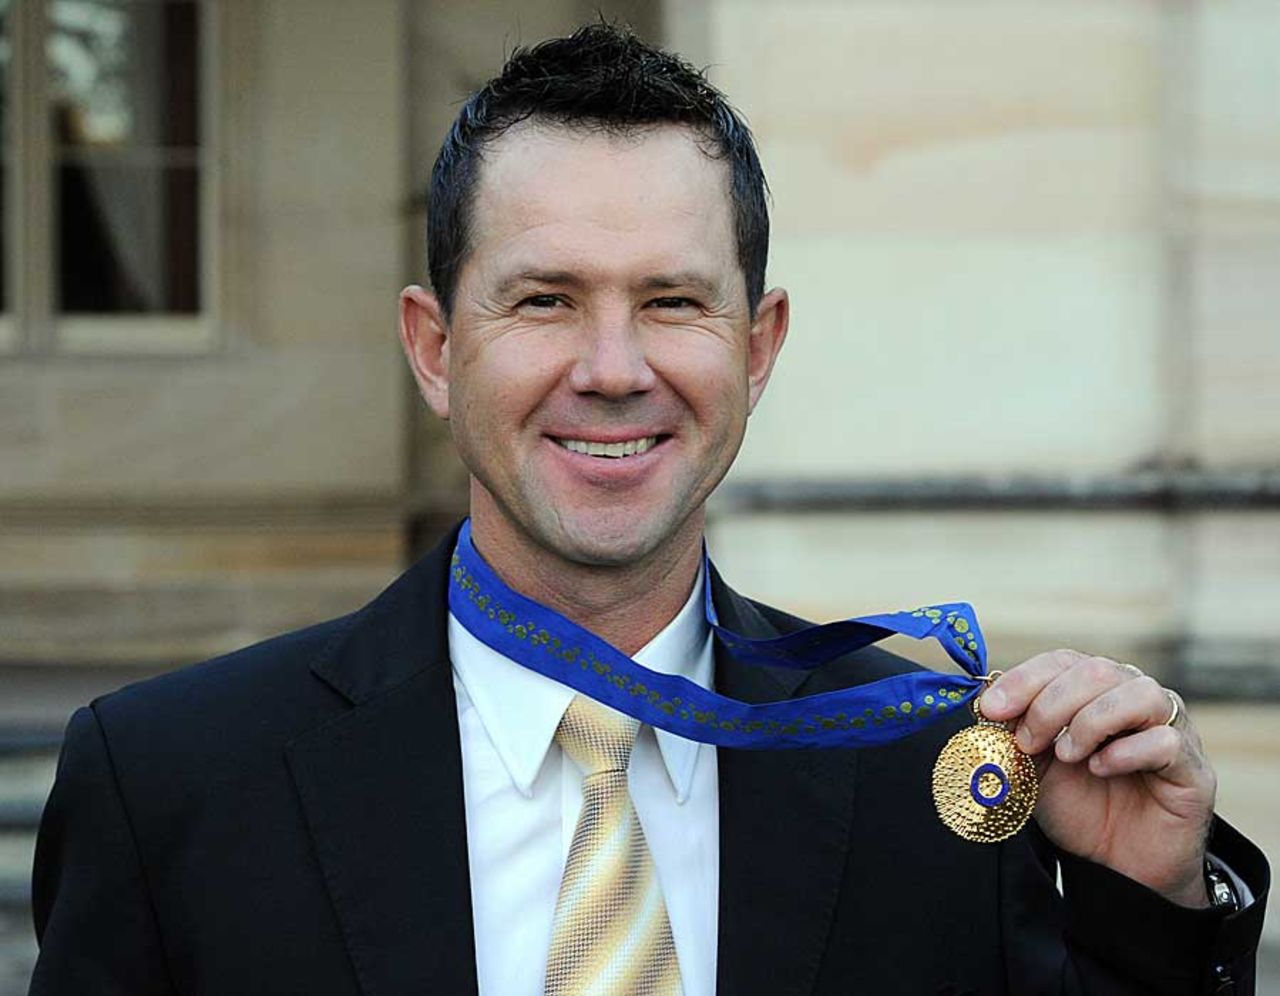 Ricky Ponting with the Order of Australia medal, Sydney, May 10, 2012